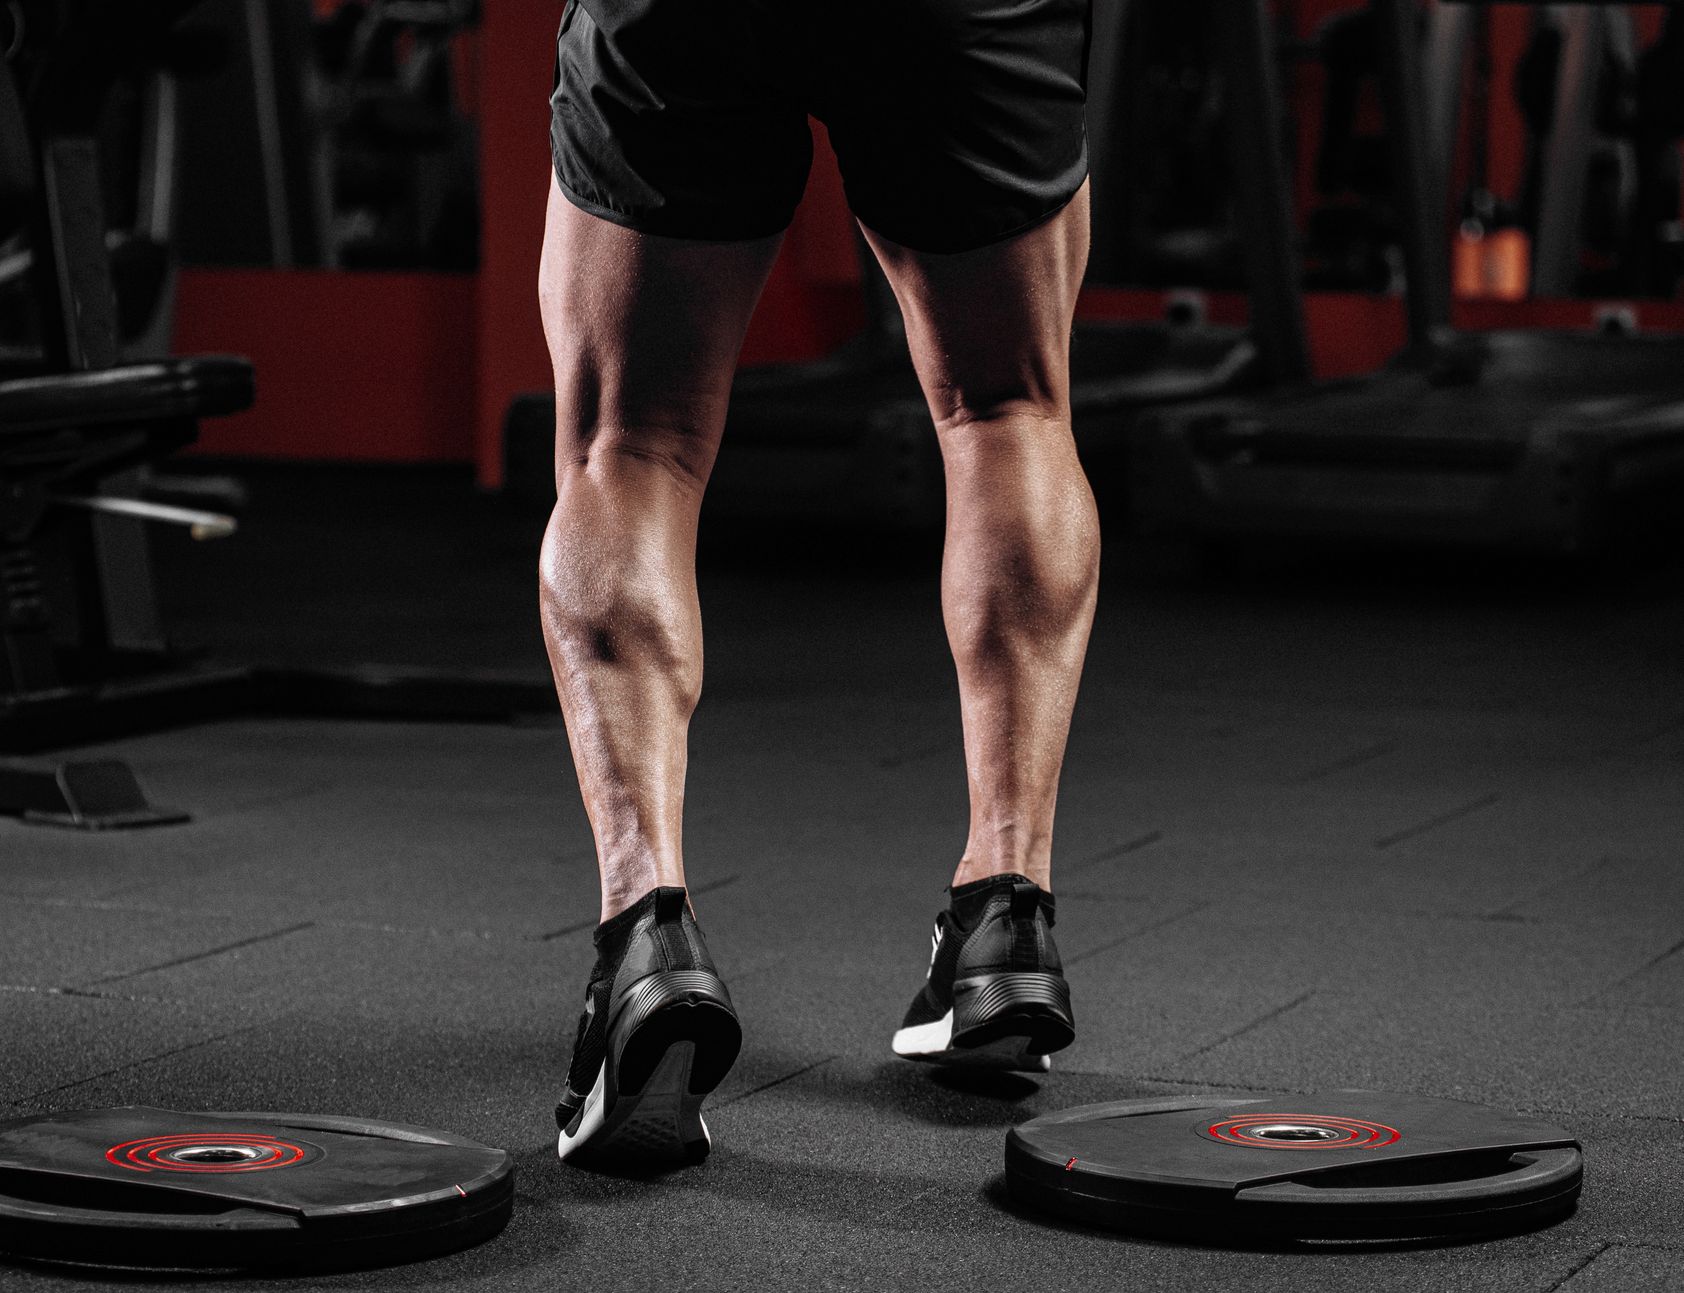 How does one replace leg day? – 1 Up Nutrition